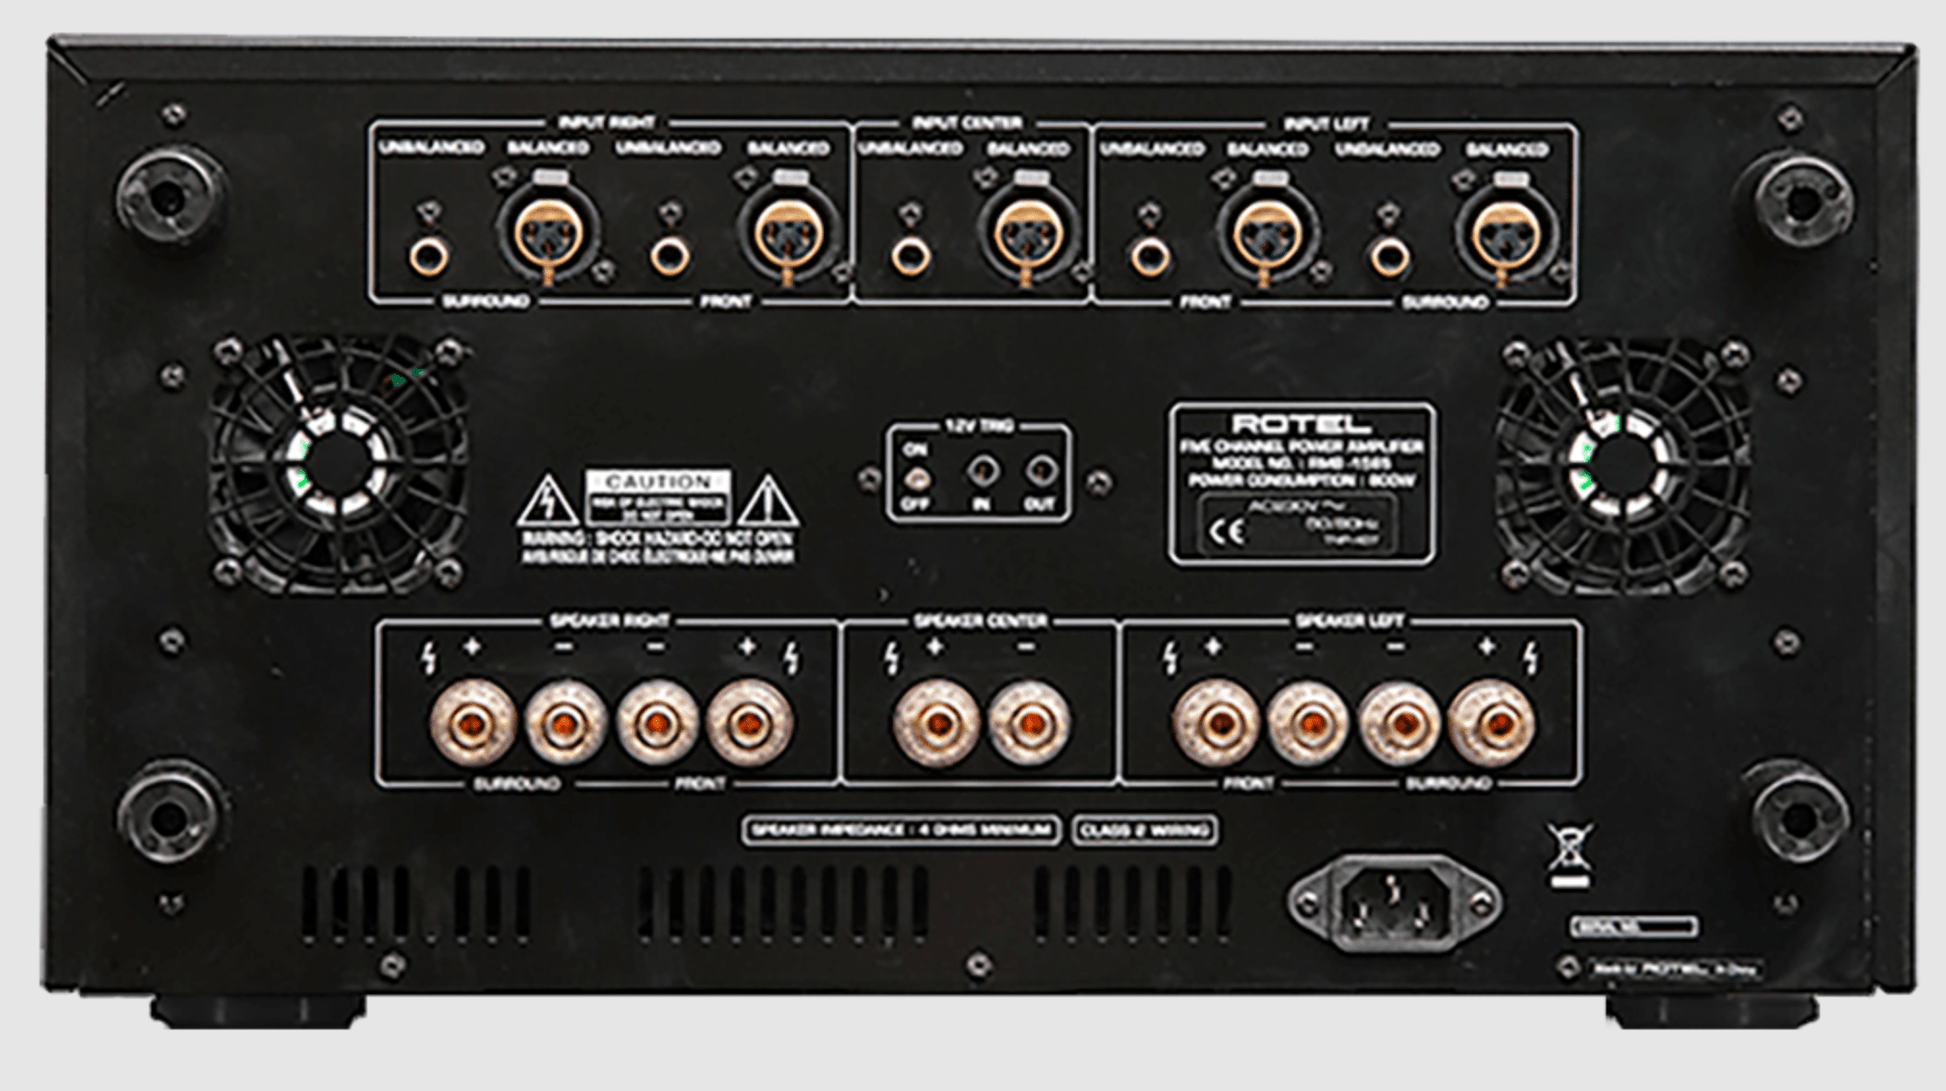 Rotel Power Amplifiers Rotel RMB-1585 Multi-Channel Power Amplifier